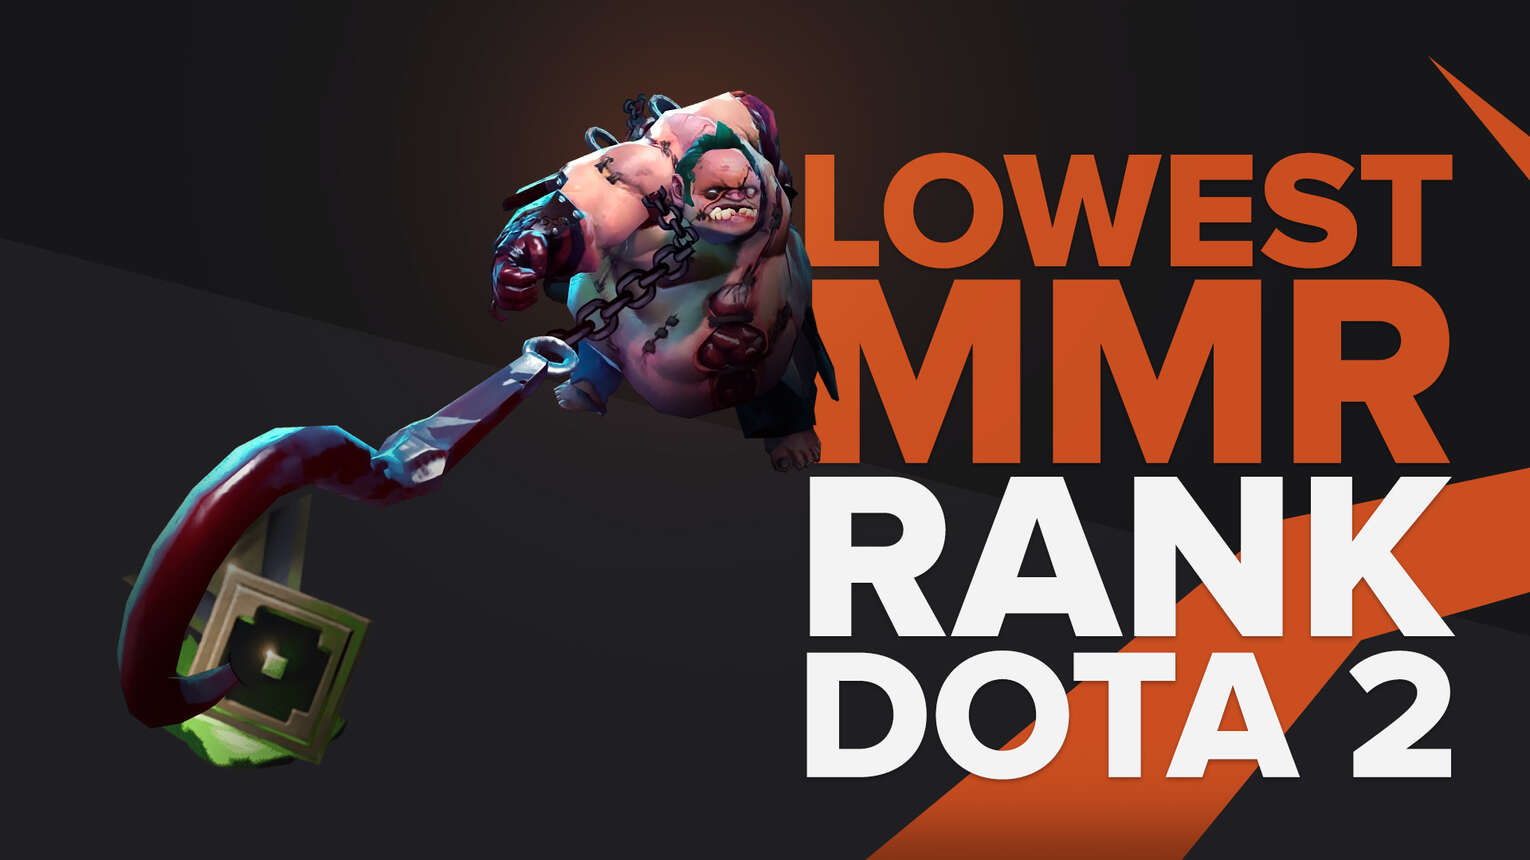 The Lowest MMR and Rank  you can have in Dota 2